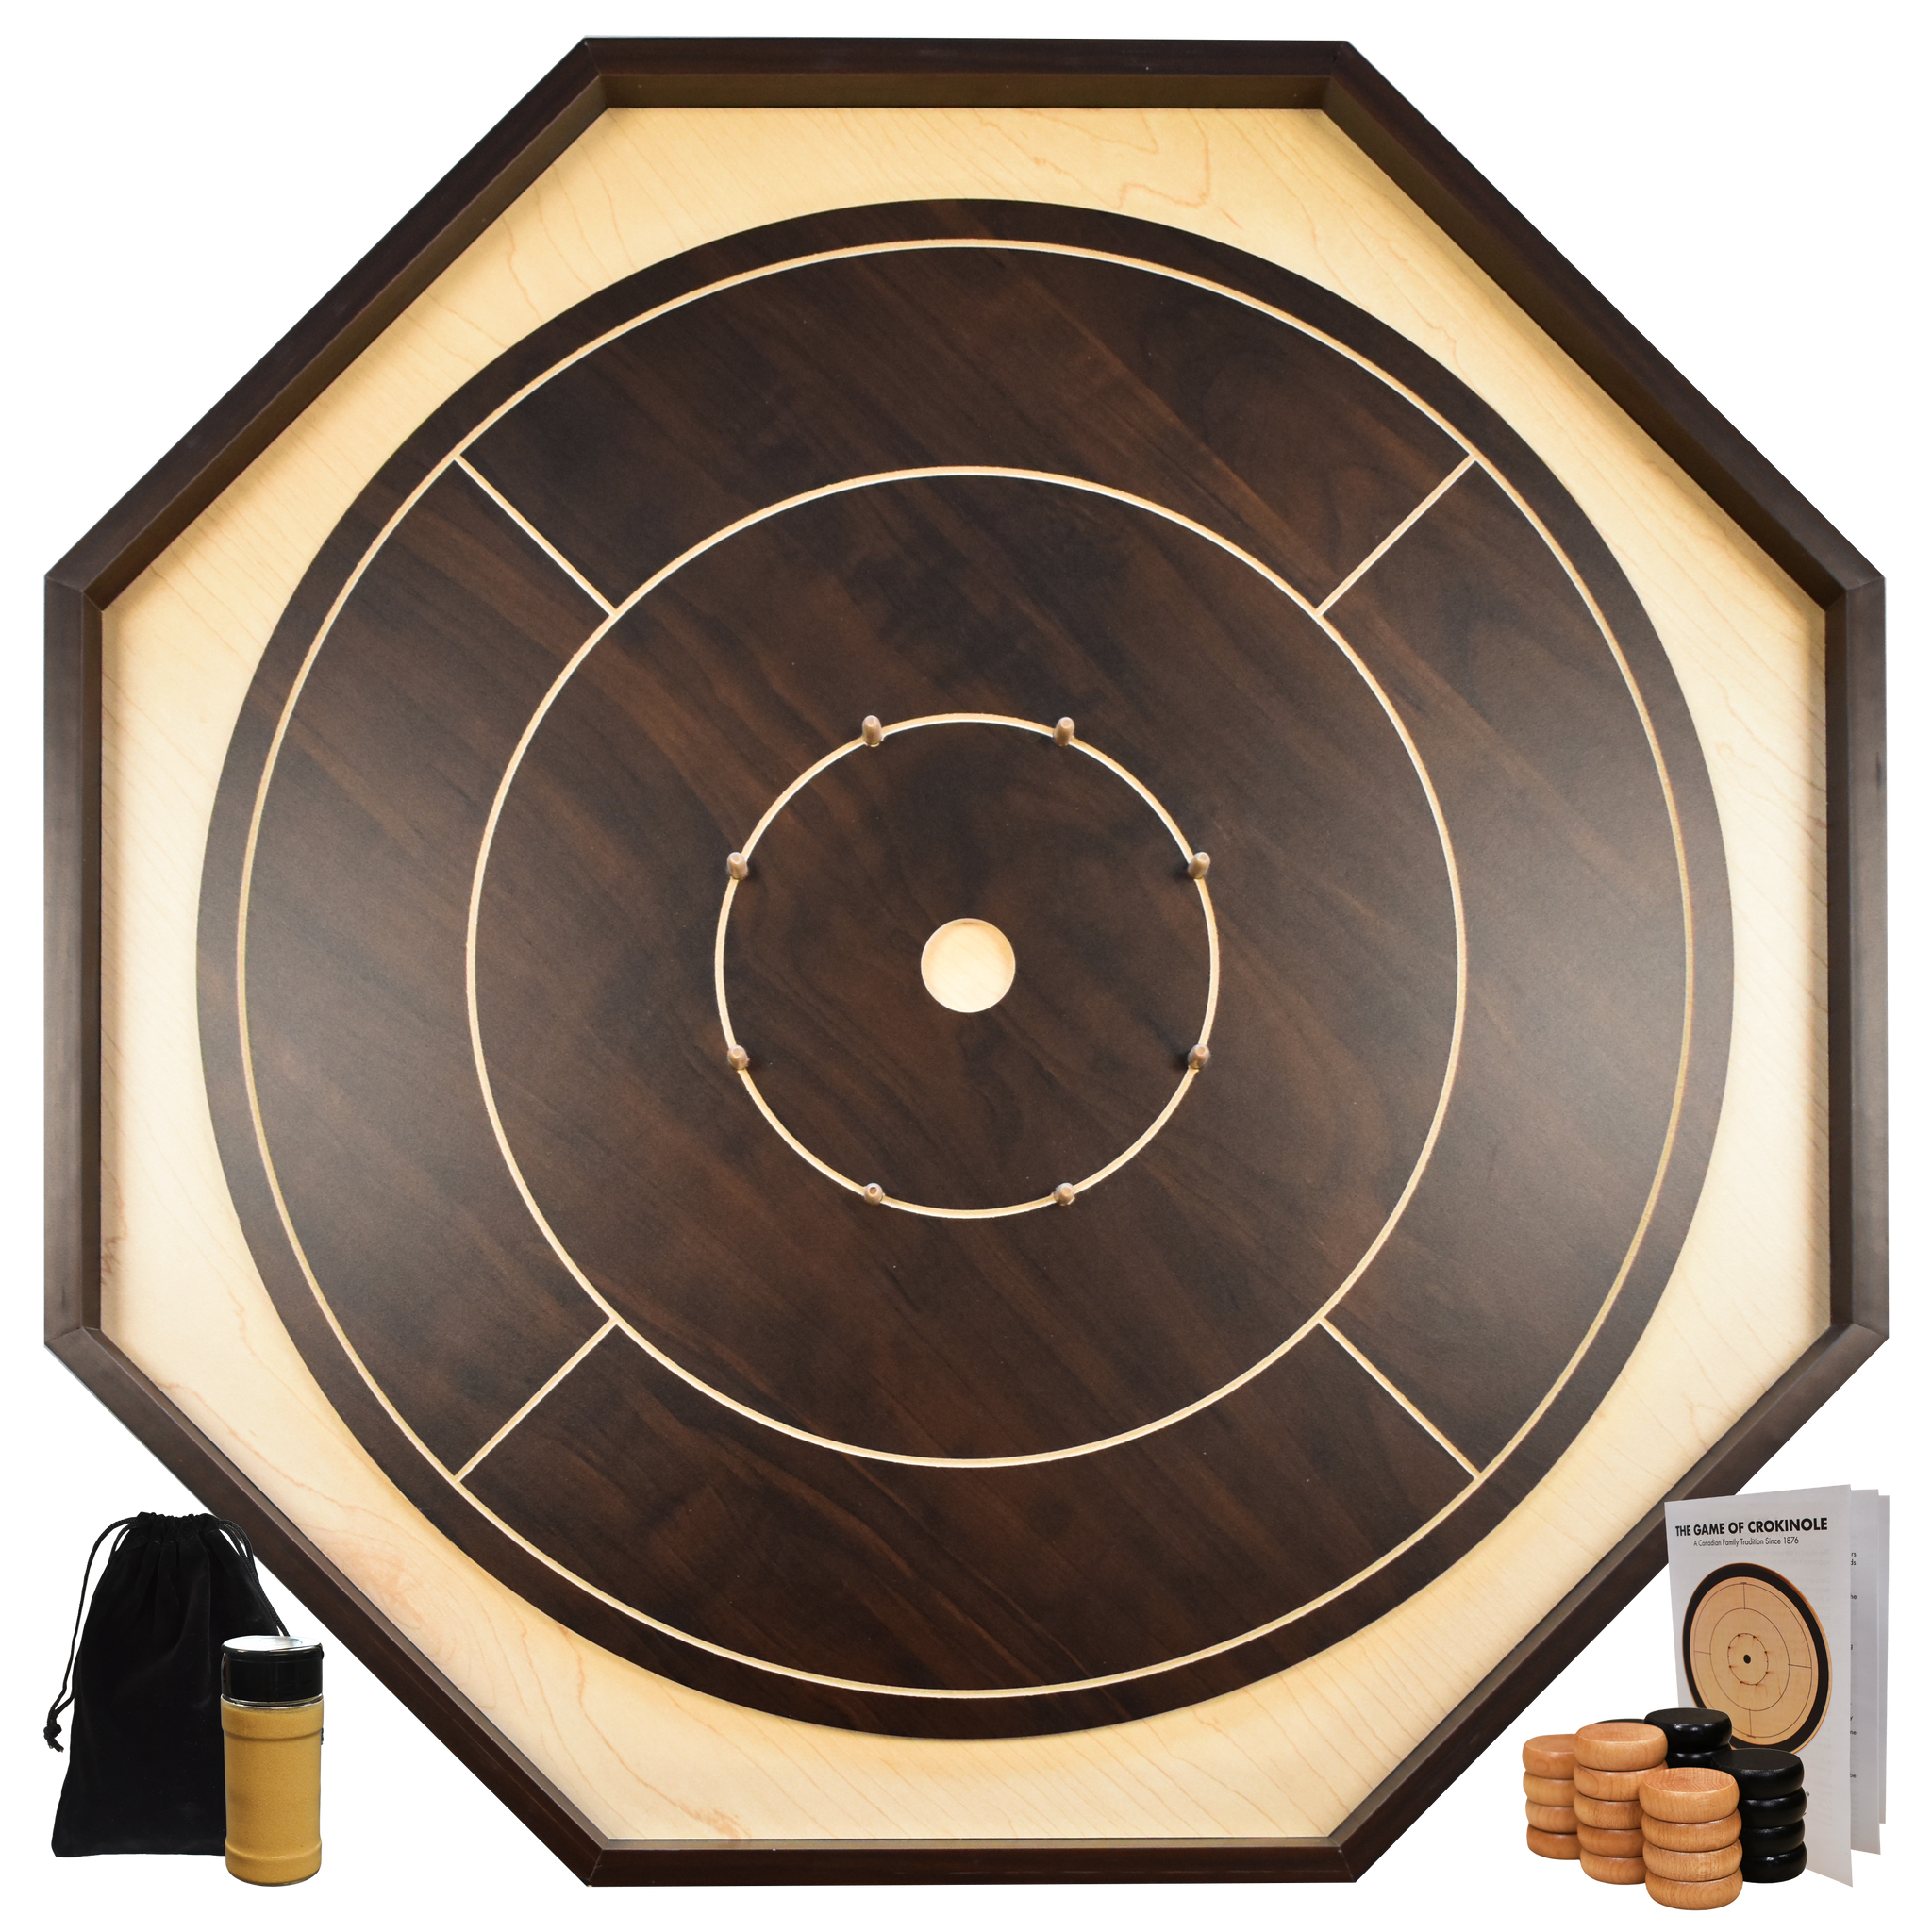 Beginners guide to Crokinole, a Canadian board game